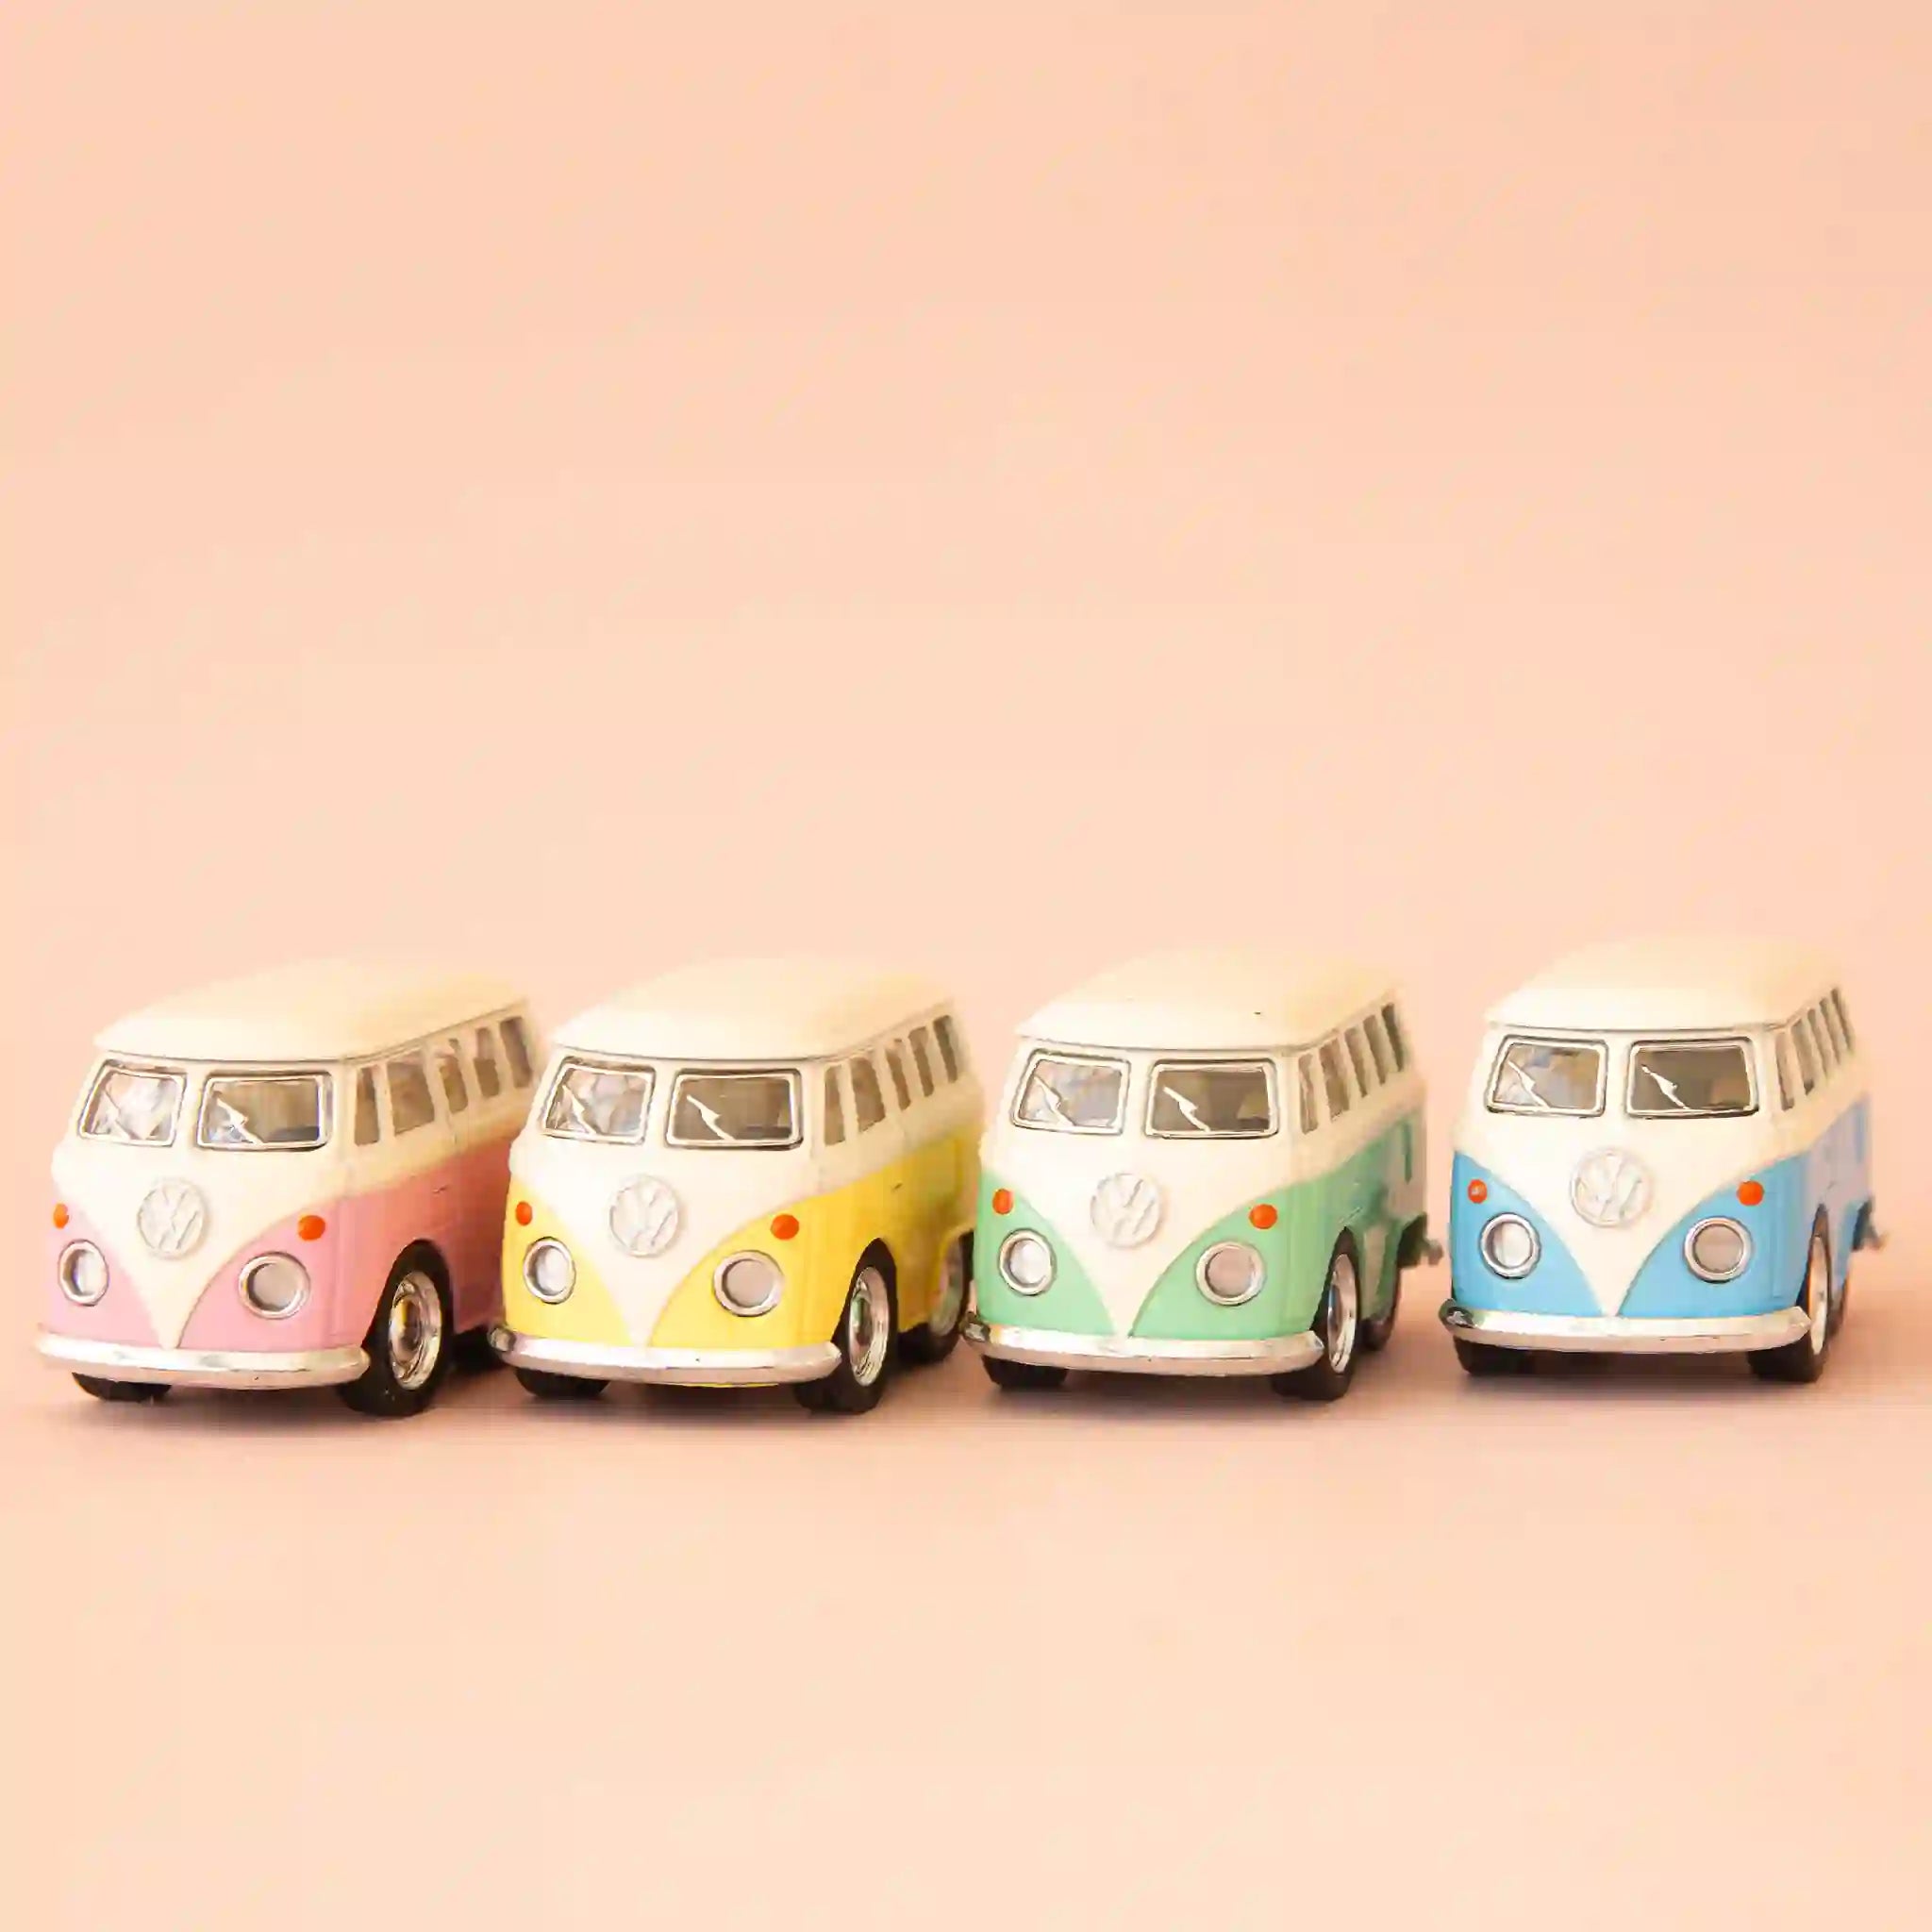 On a peach background are four VW toy buses in different colors. From left to right there is pink, yellow, green and blue. 